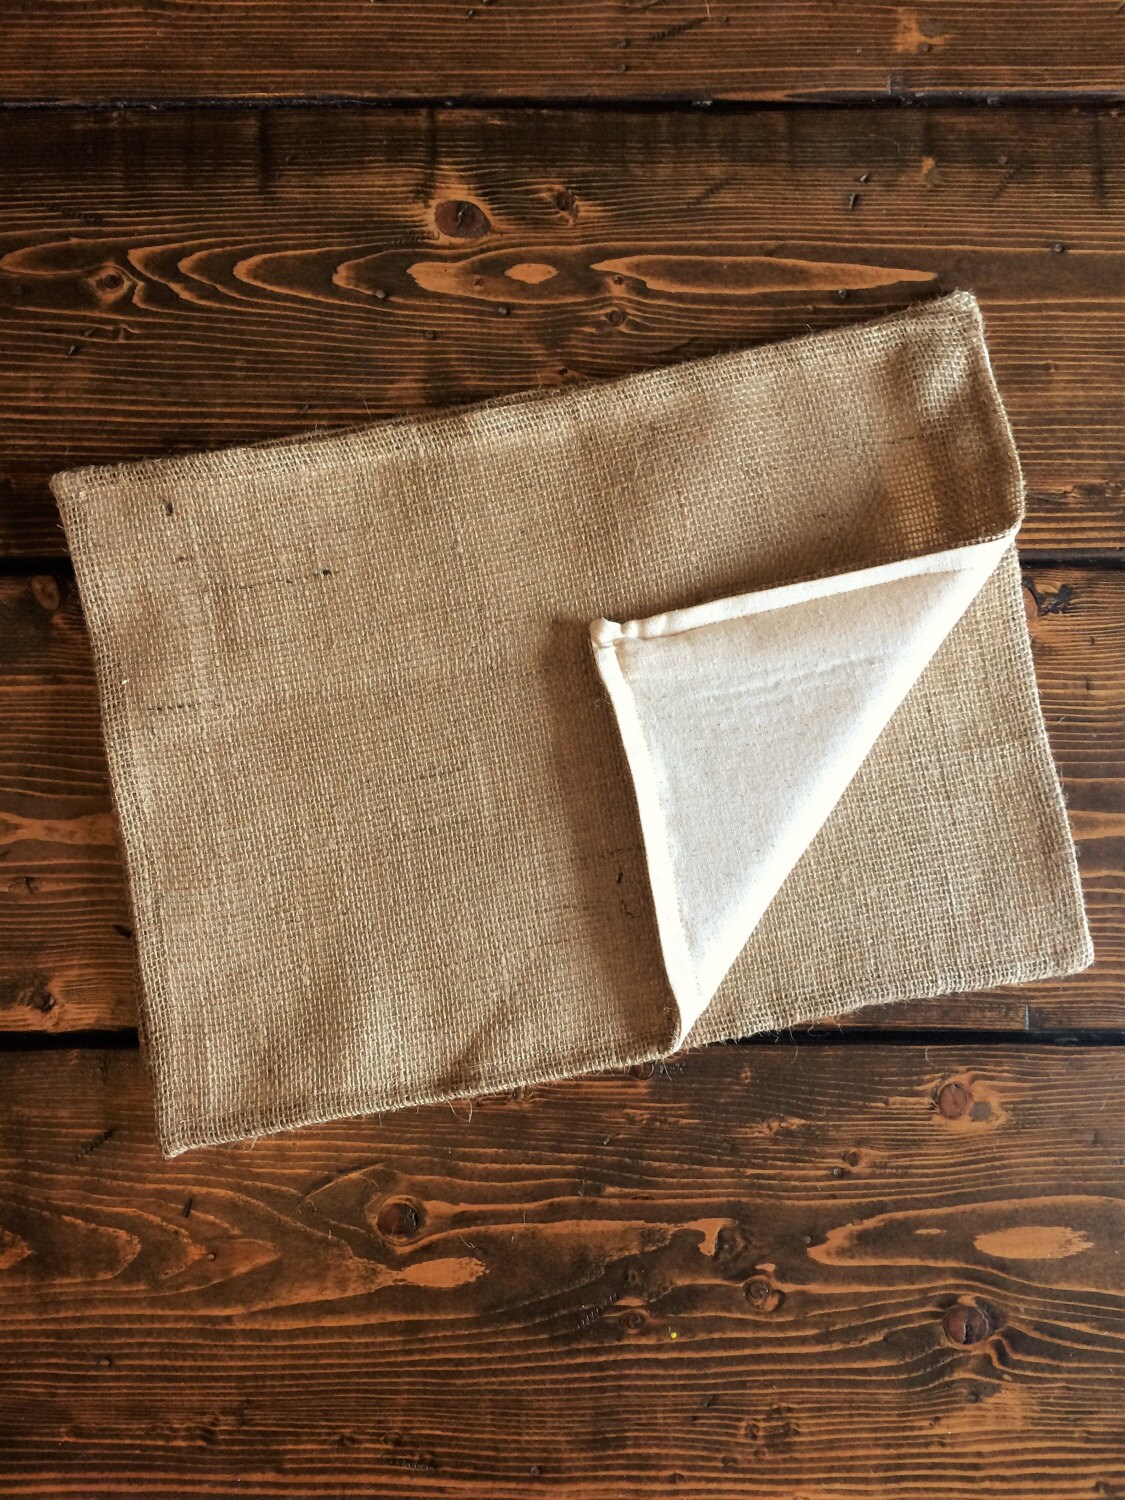 Natural Jute Burlap Hessian Cloth Lining Fabric Rustic Wedding Sheet Sack  Material, Arts & Craft, By The Metre - 183cm or 101cm width